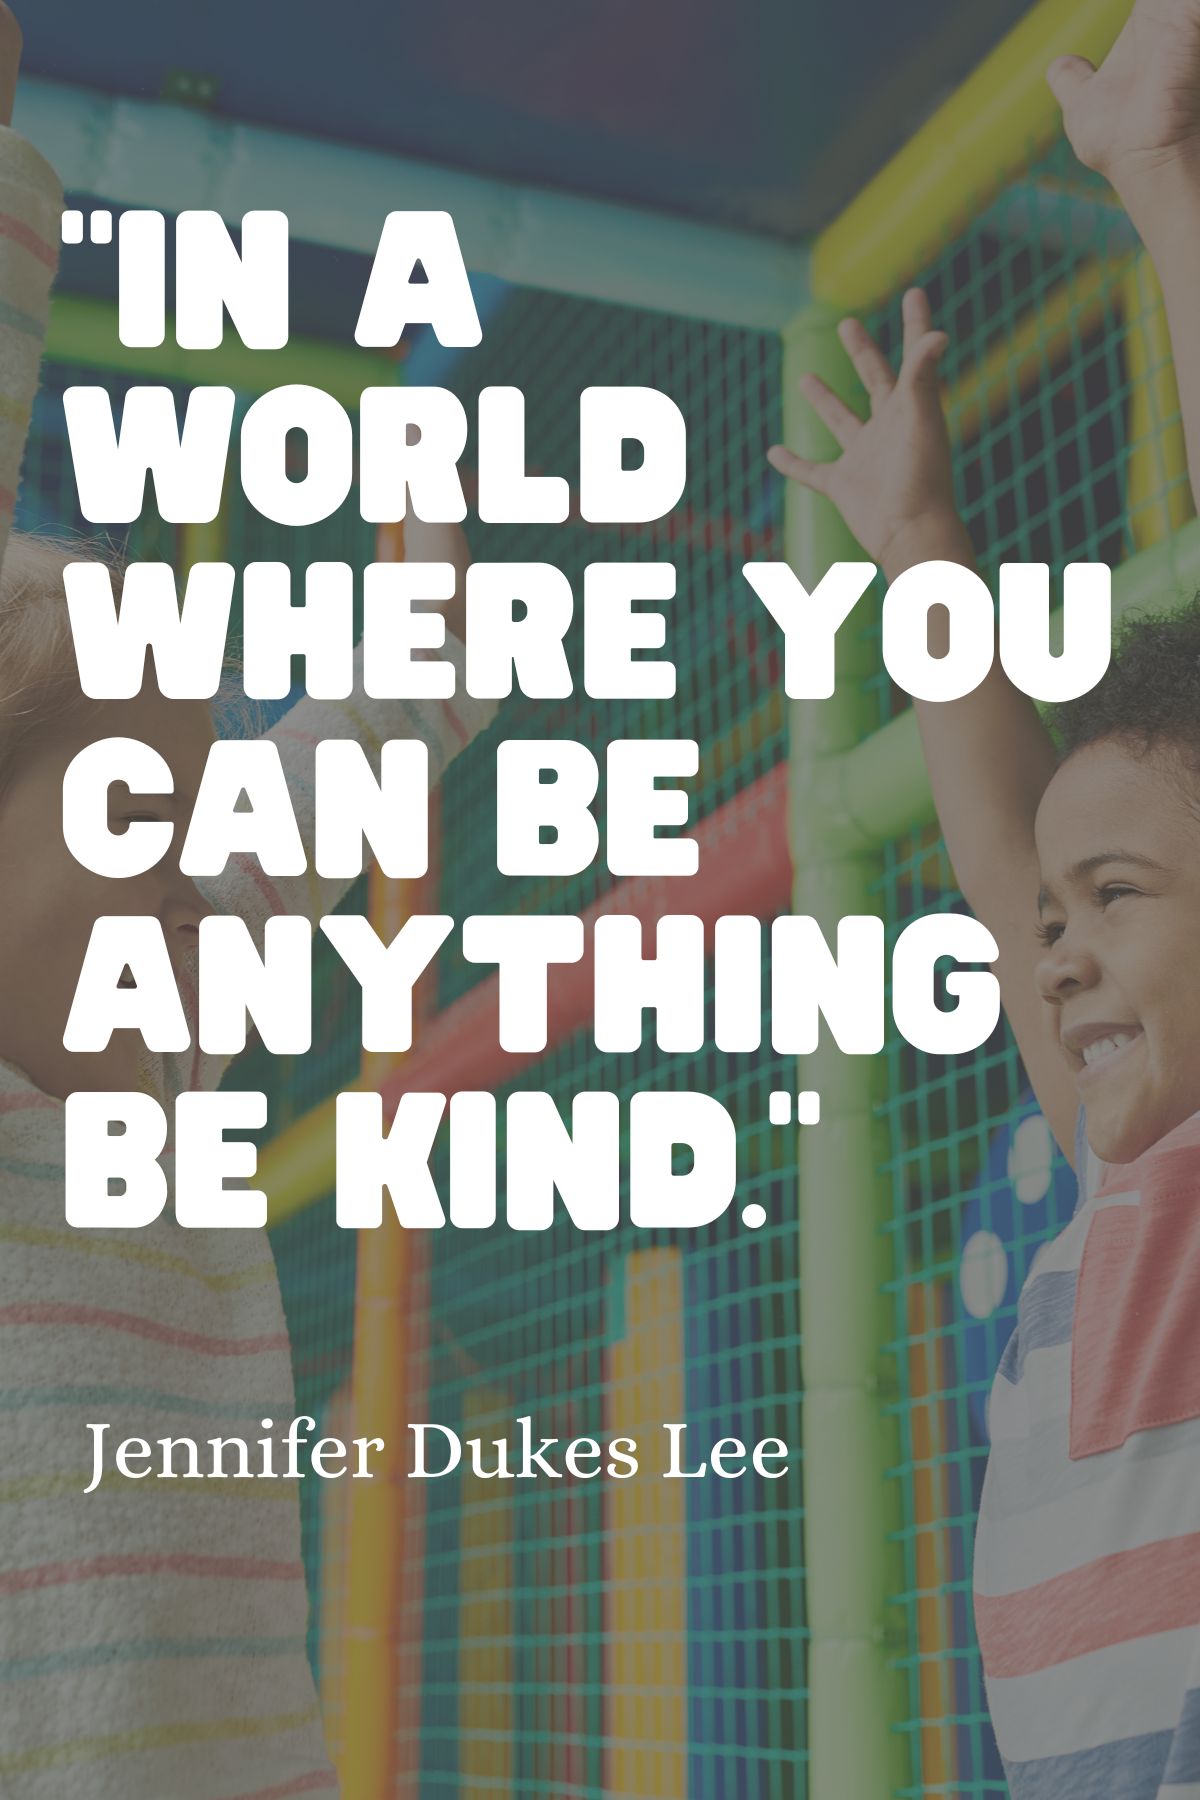 "In a world where you can be anything, be kind." - Jennifer Dukes Lee